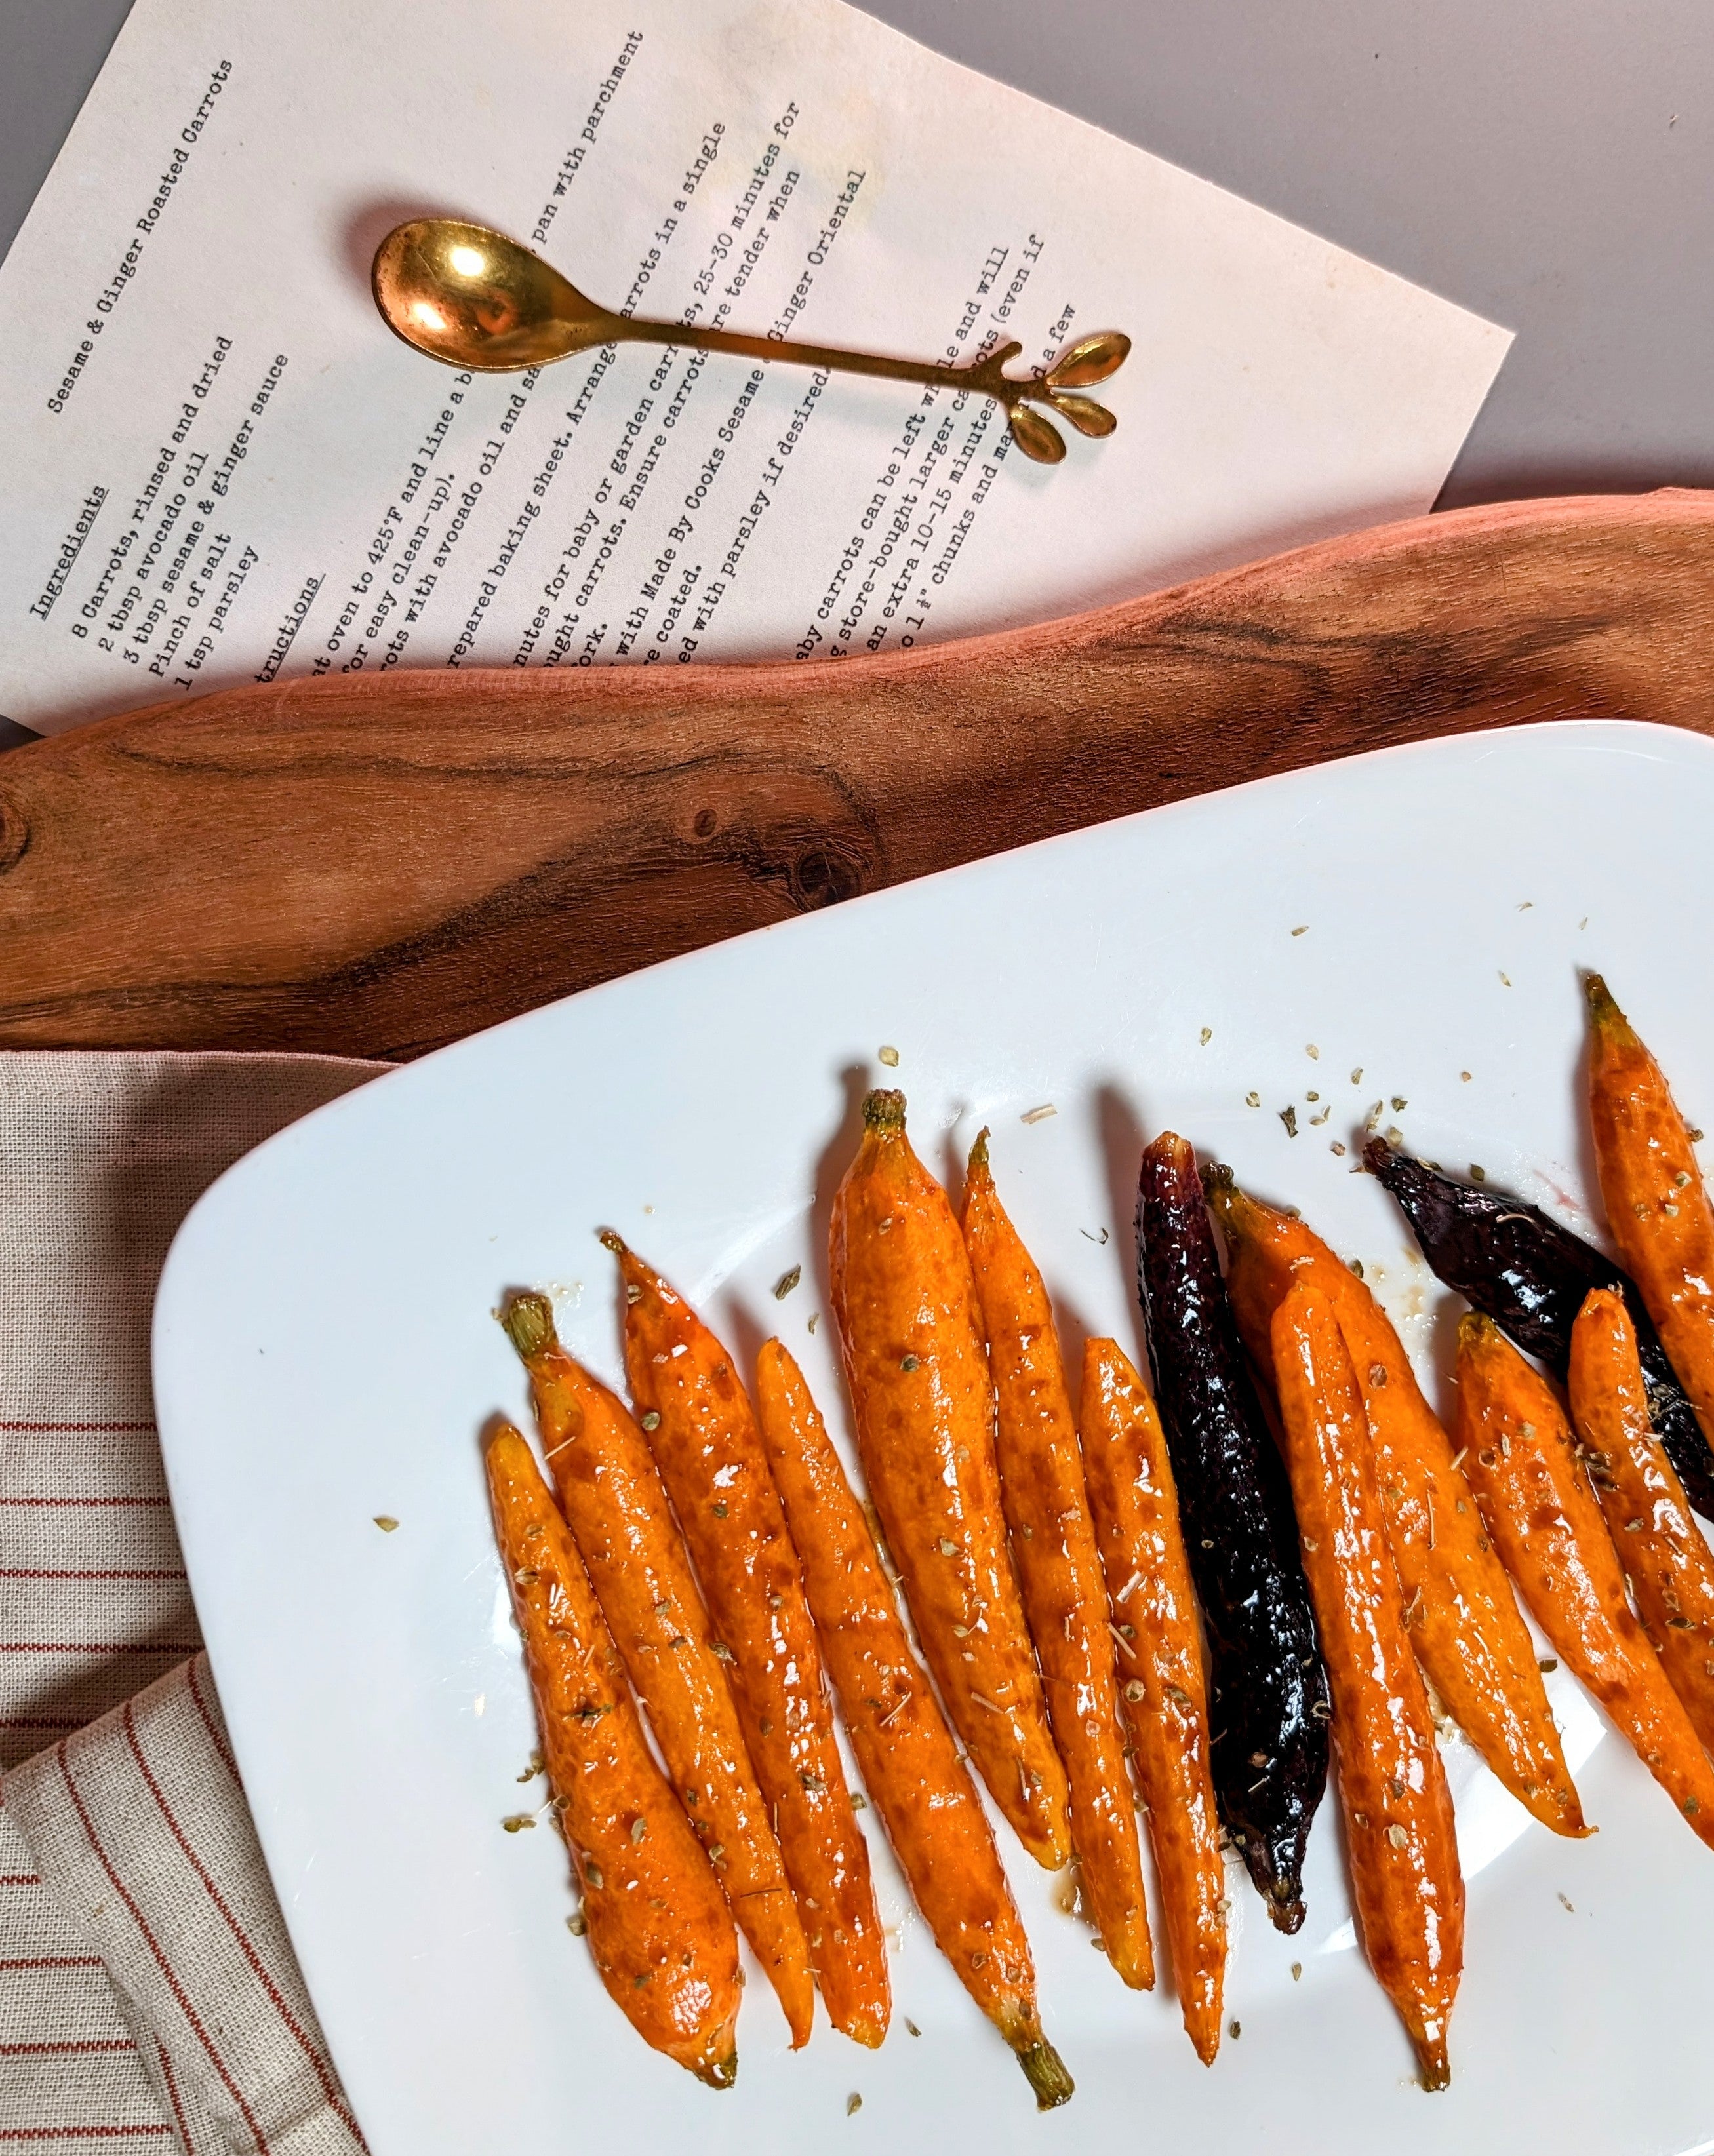 Sesame & Ginger Sauce coated roasted carrots with recipe page and wooden cutting board.